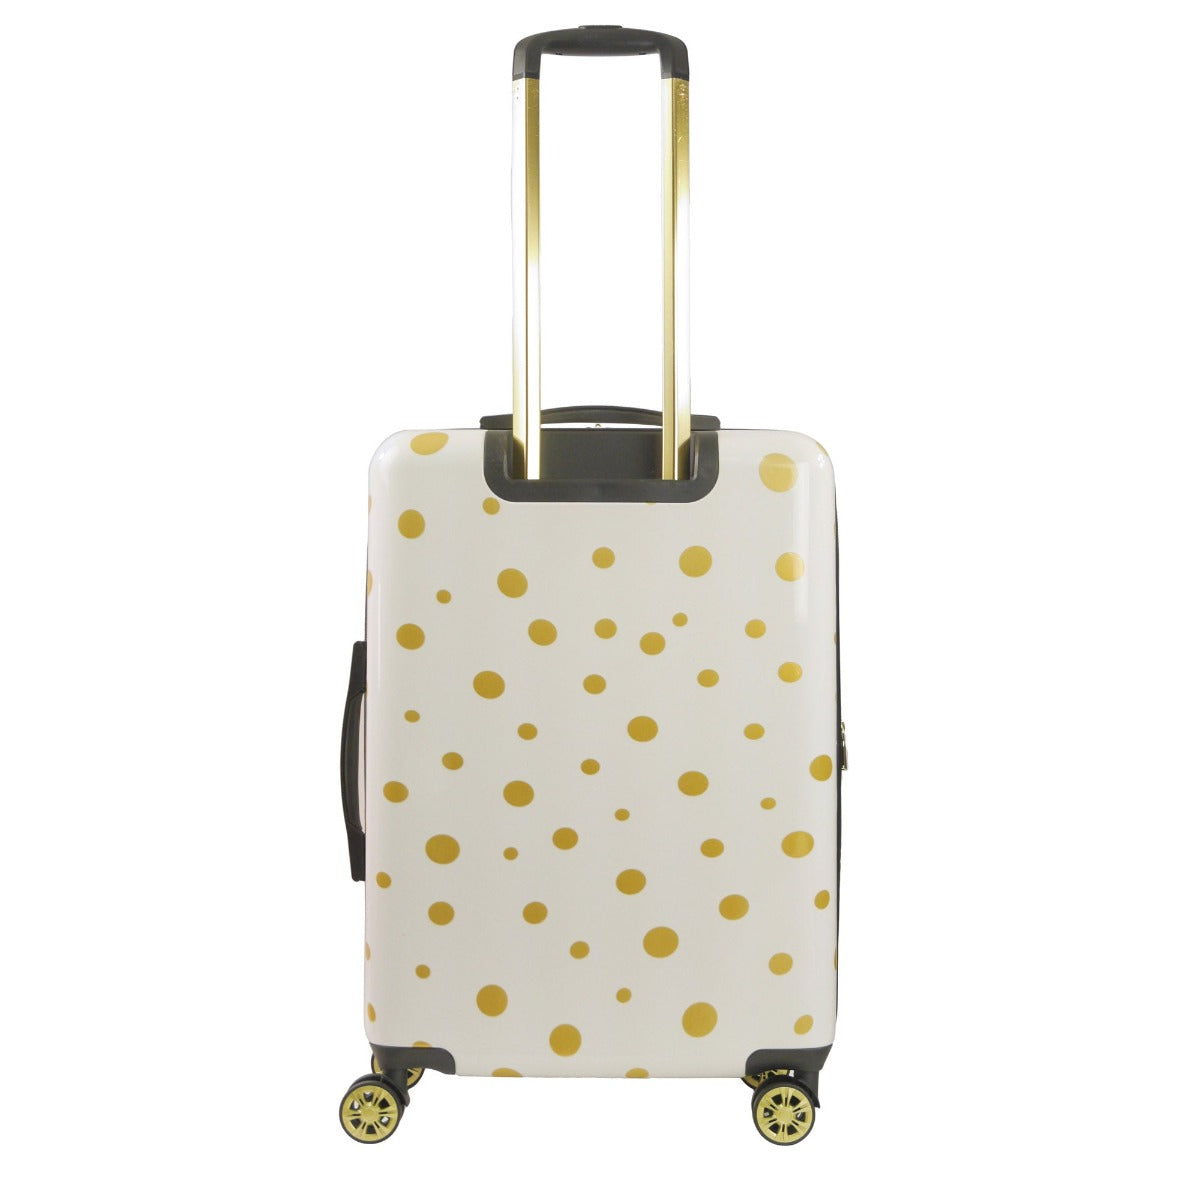 Ful Impulse Mixed Dots hardside spinner 26" checked luggage white gold suitcase